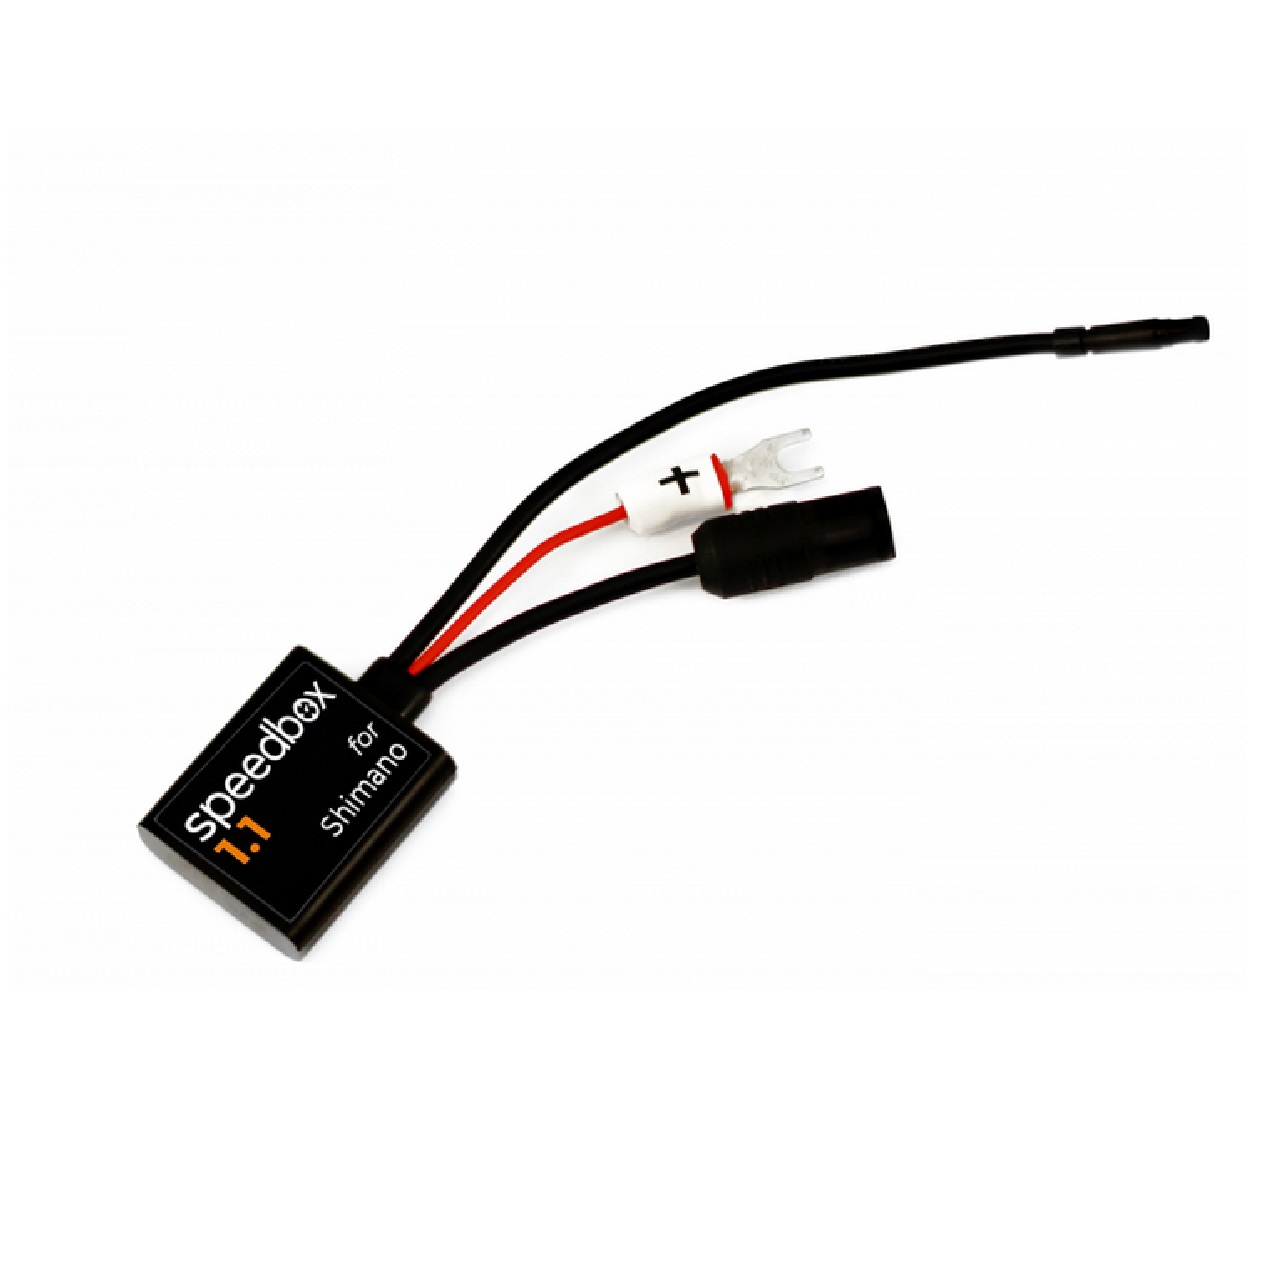 Speedbox Ebike Speed Limit removal Chip for Shimano 1.3 for EP8 Motor